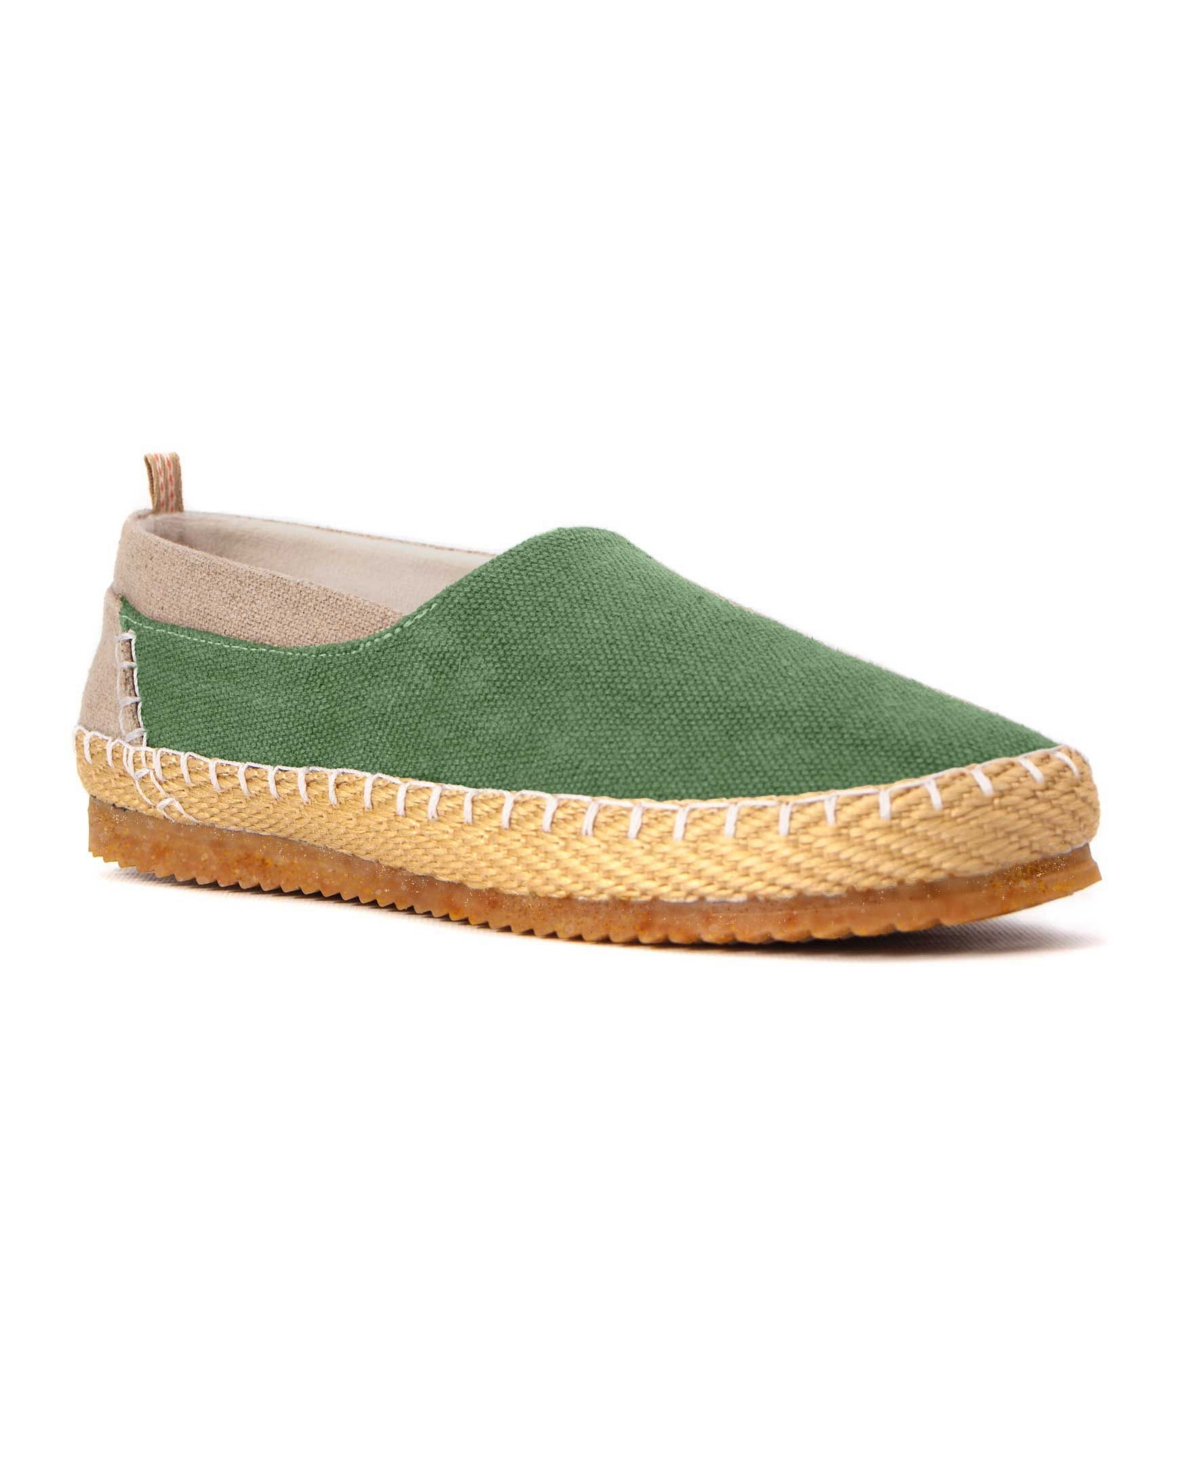 Women's Clementine Slip-On Organic Hemp Canvas Espadrille-Inspired Shoes - Charcoal